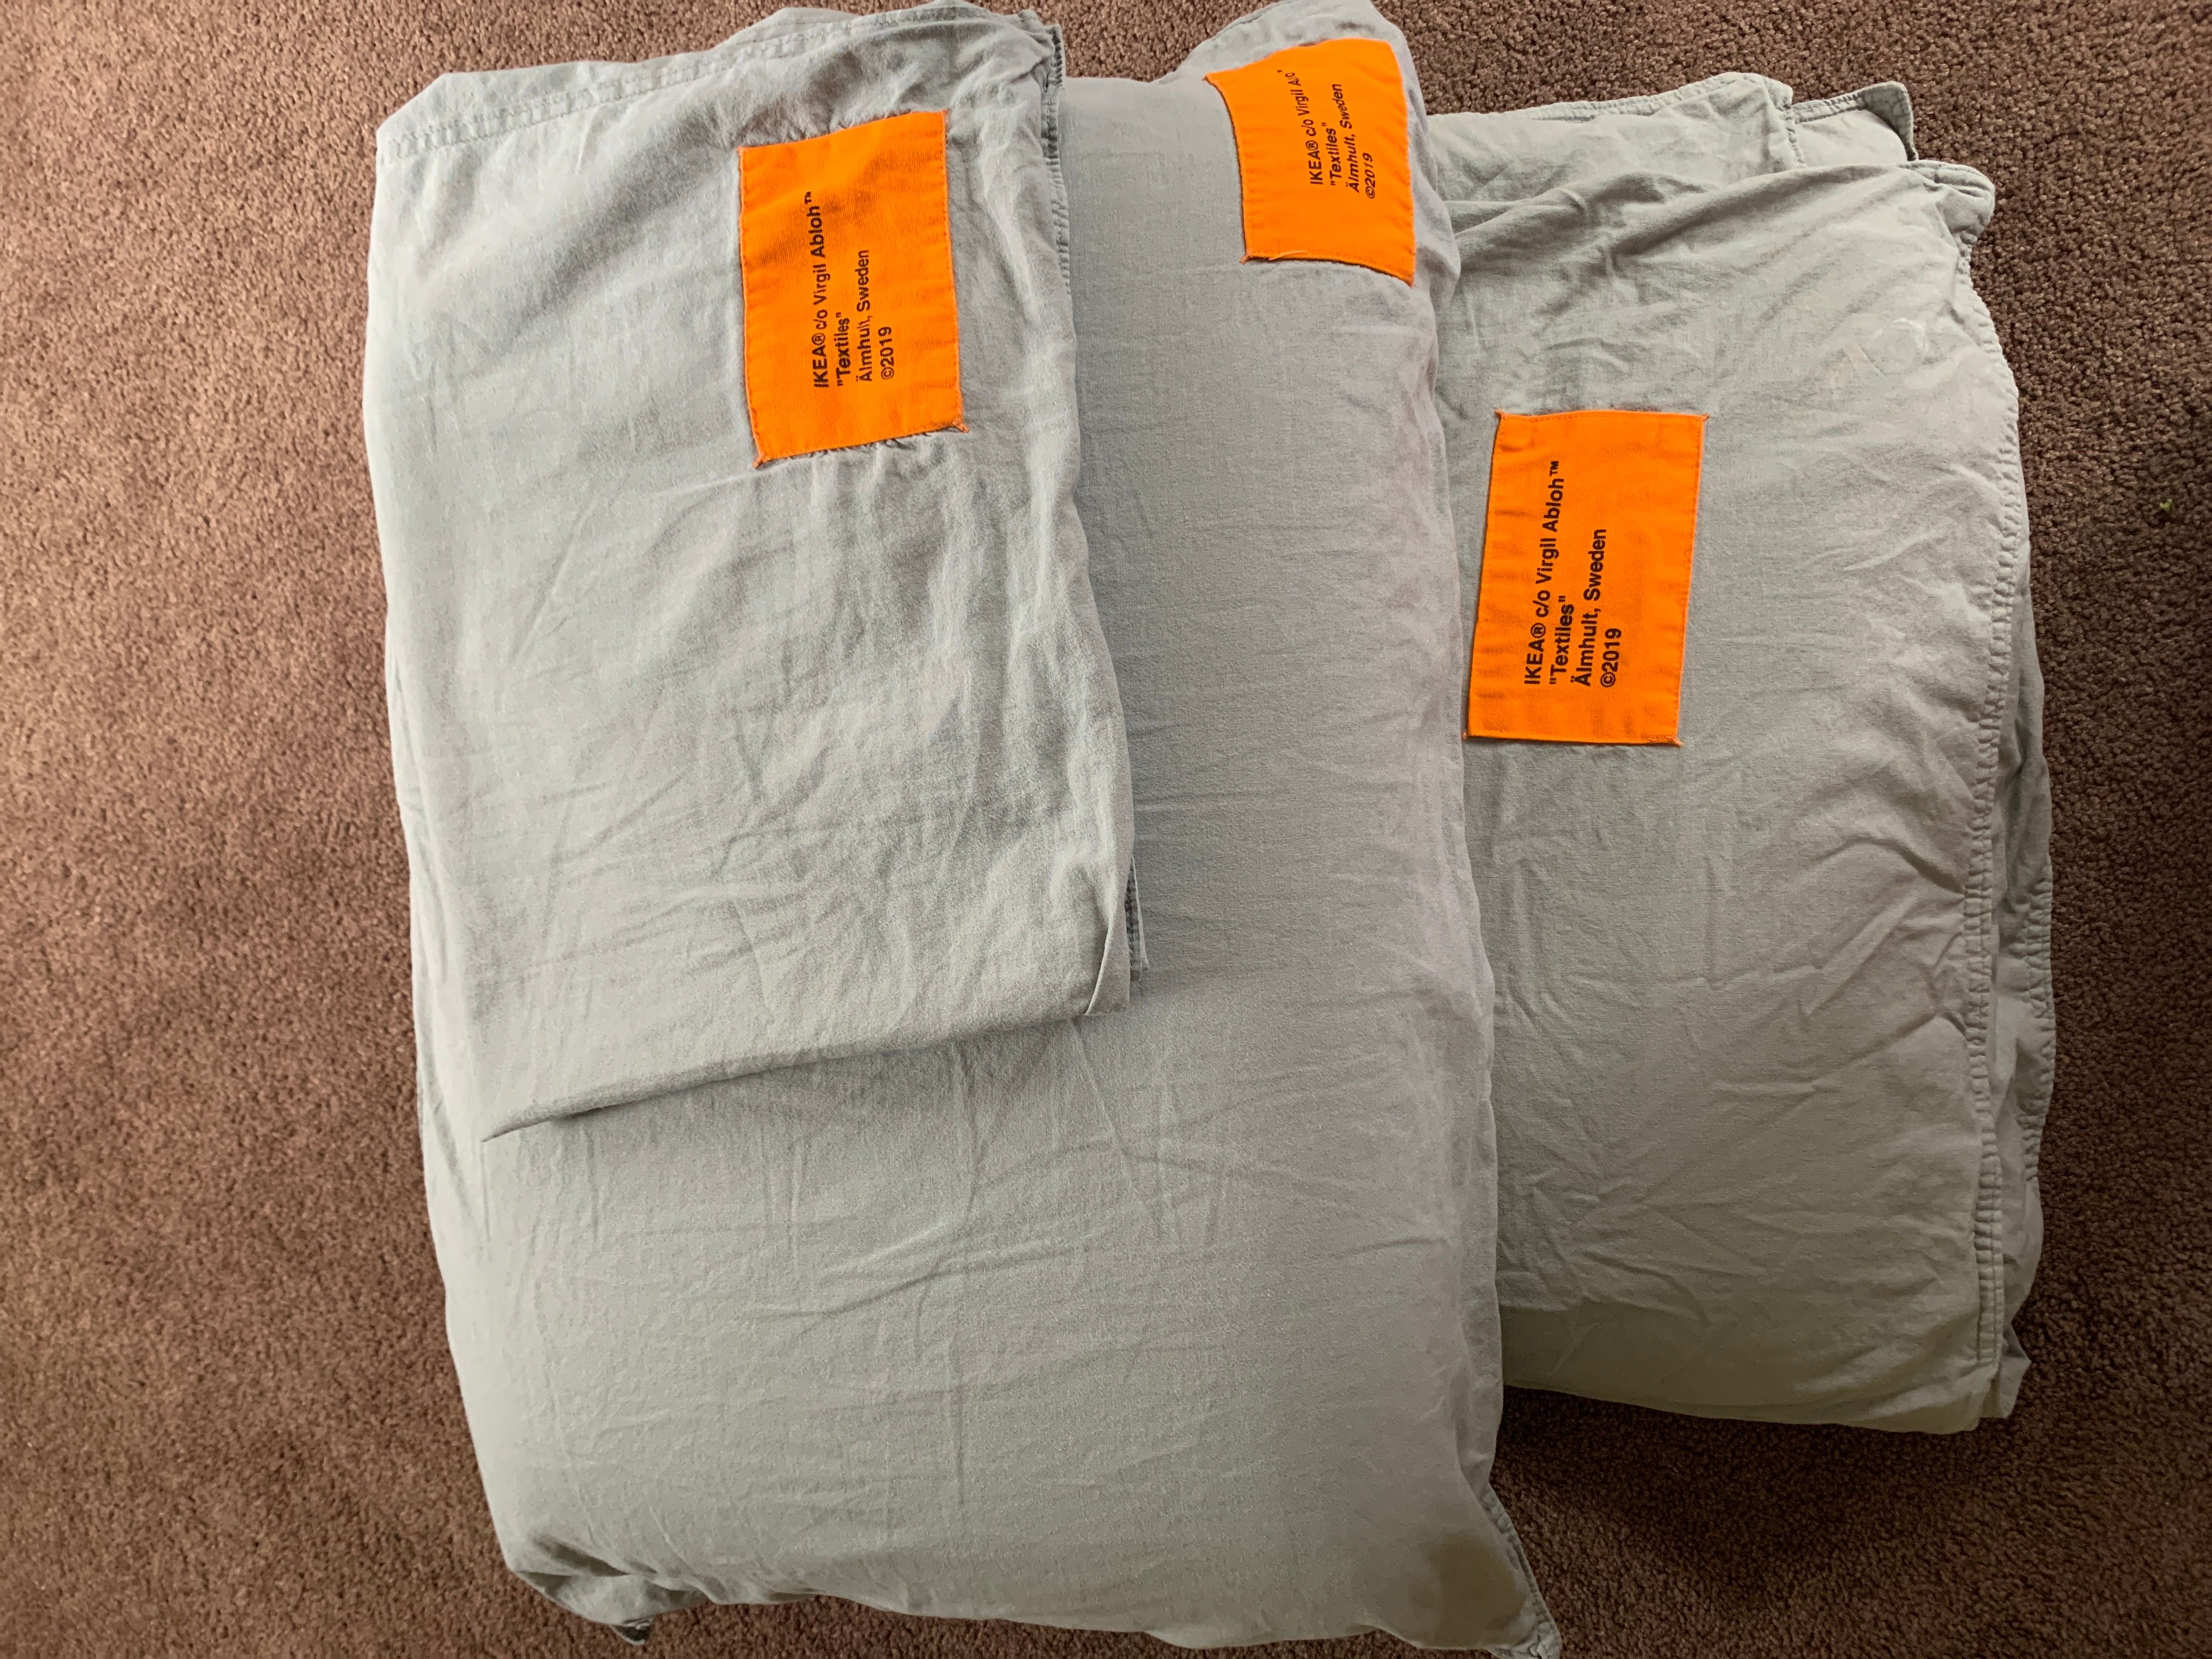 IKEA Virgil Abloh Markerad Full/Queen Bed Duvet Cover And 2 Pillow